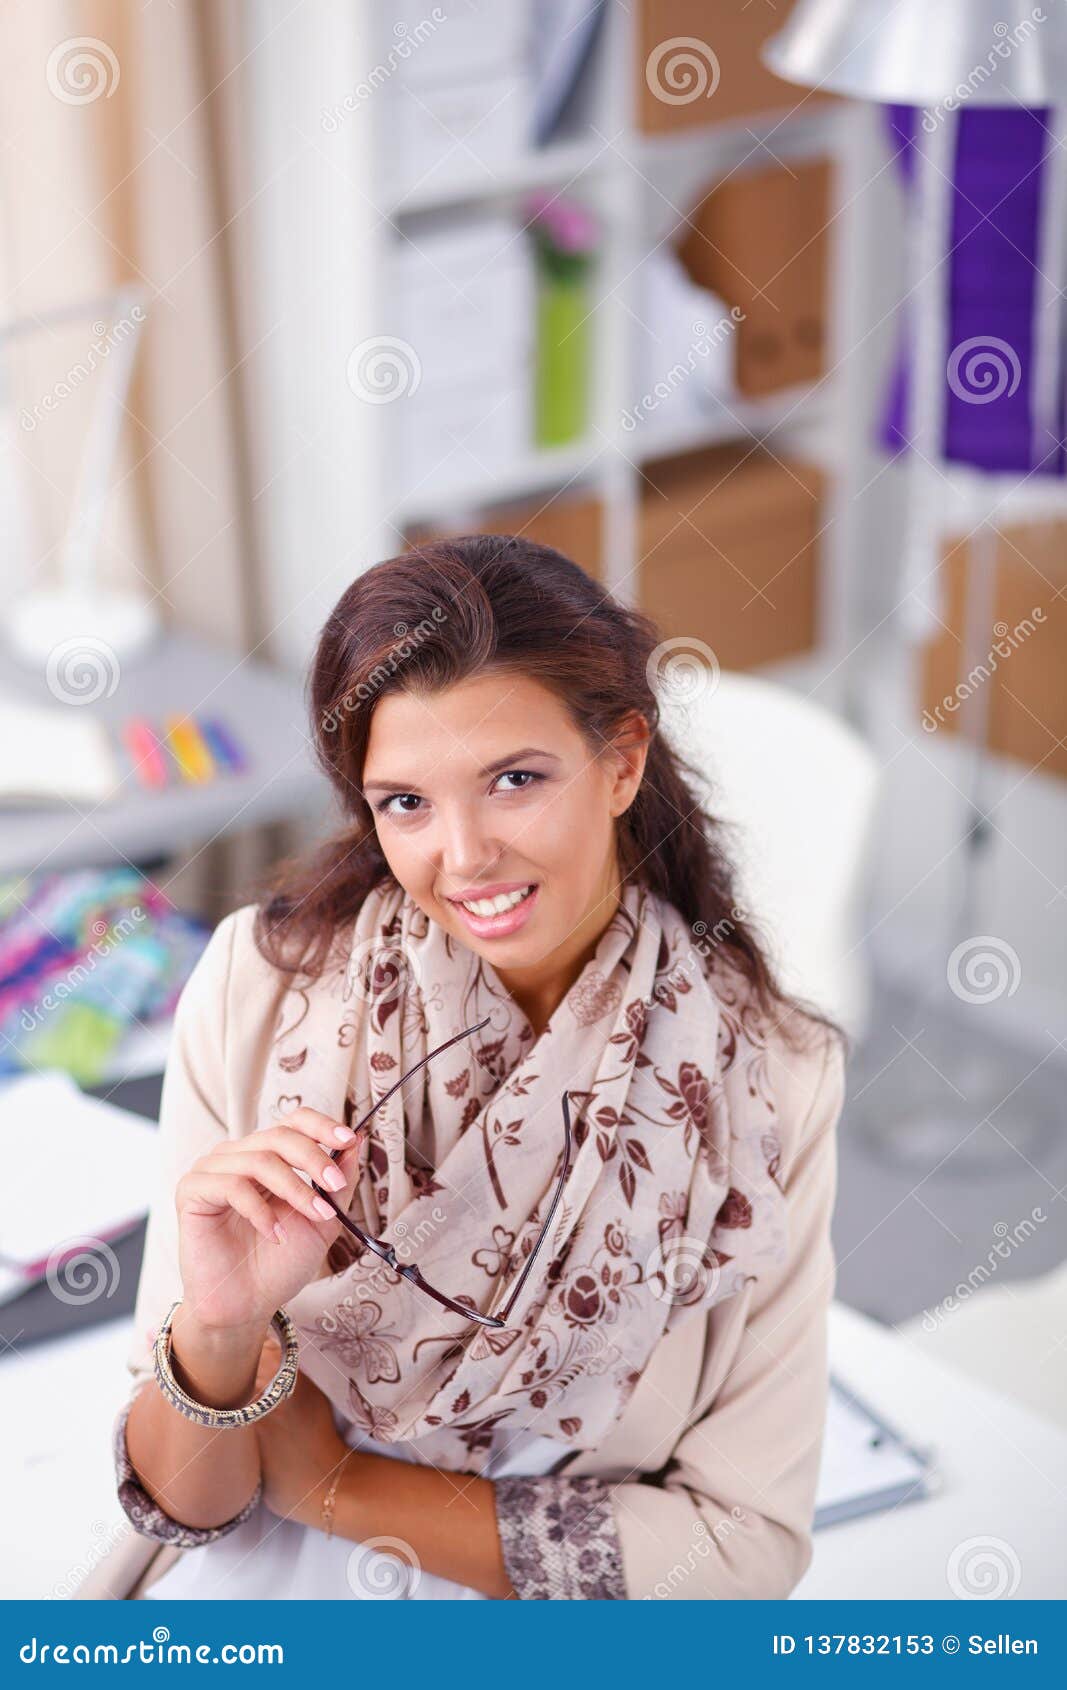 Young Woman Fashion Designer Working at Studio. Stock Image - Image of ...